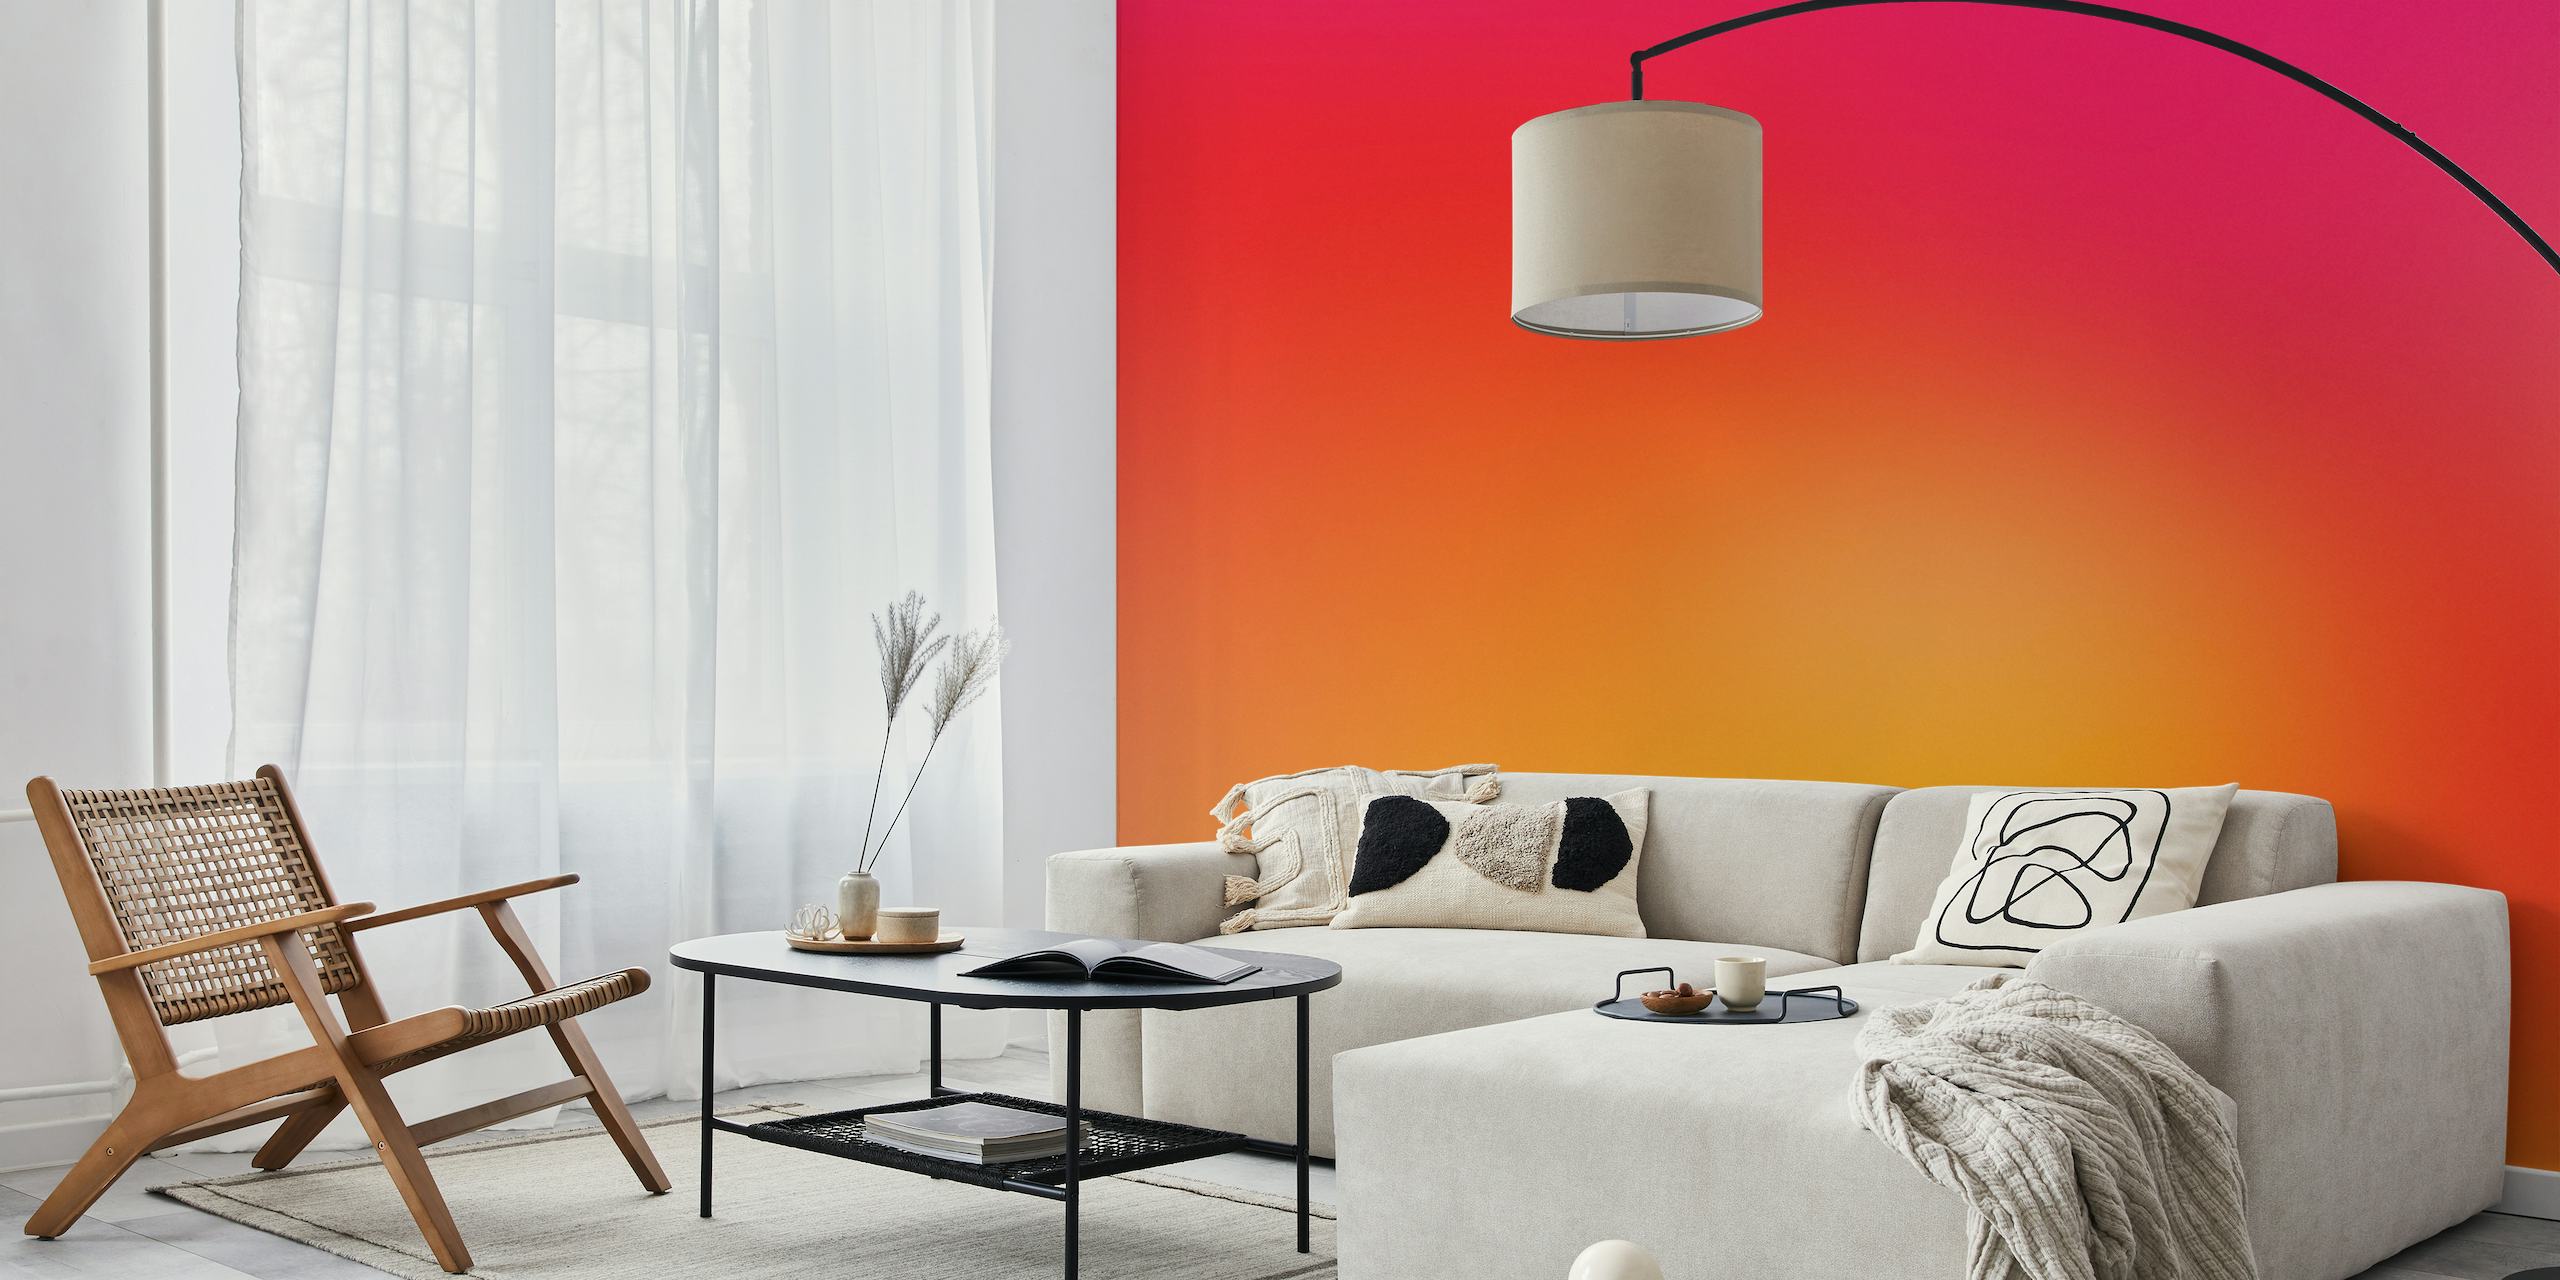 Hot Pink to Orange Gradient Wall Mural at Happywall